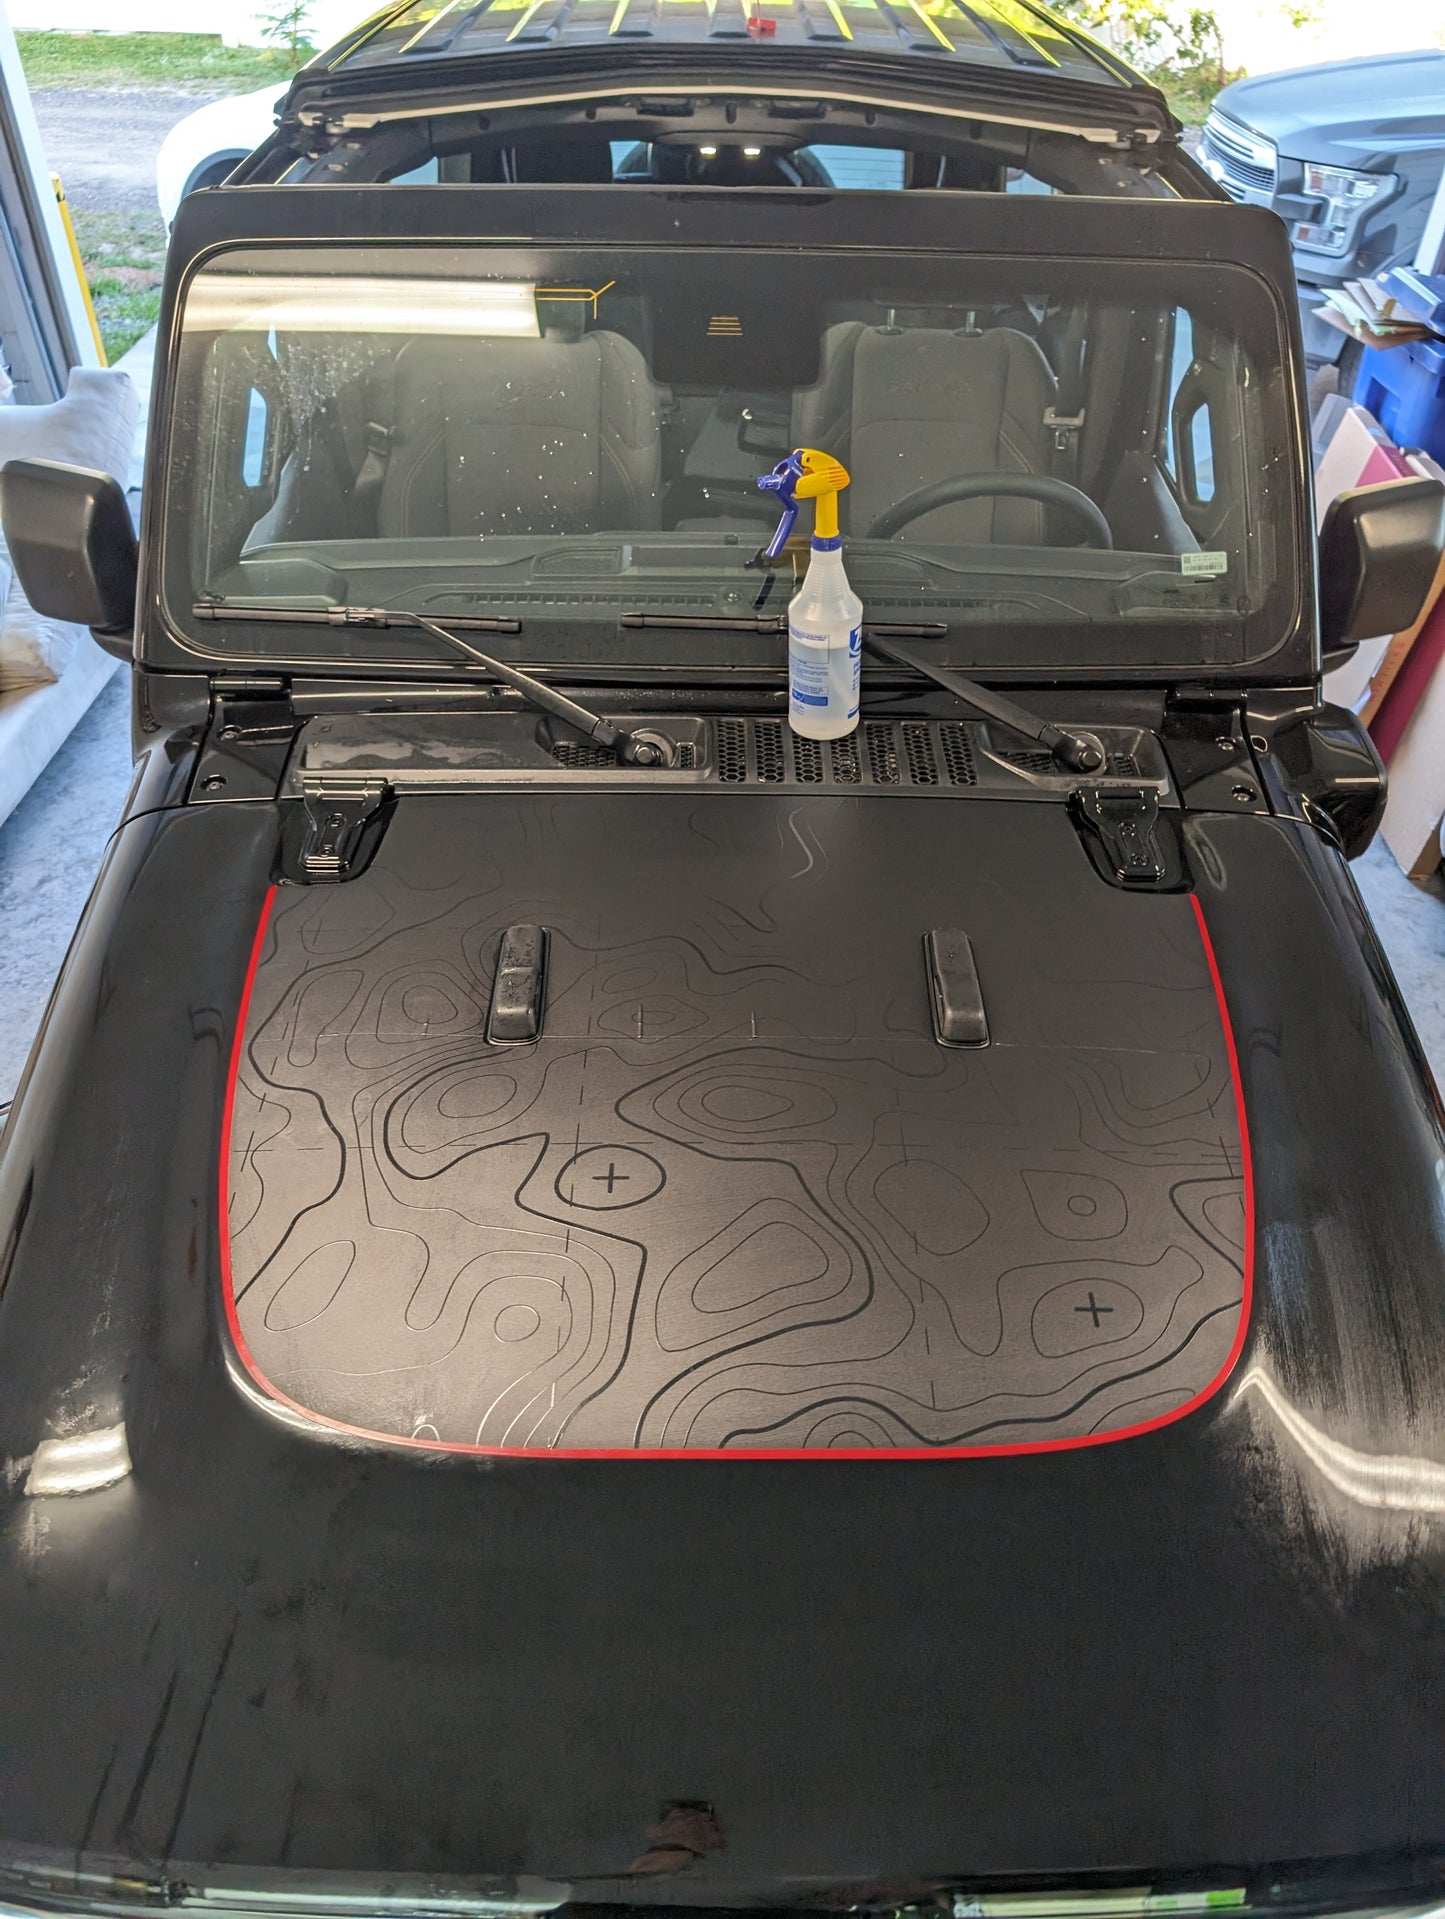 Topographic Full Color Line Blackout Hood Decal- Fits Jeep Wrangler & Gladiator JL Hood Decal Printed Single Layer Decal